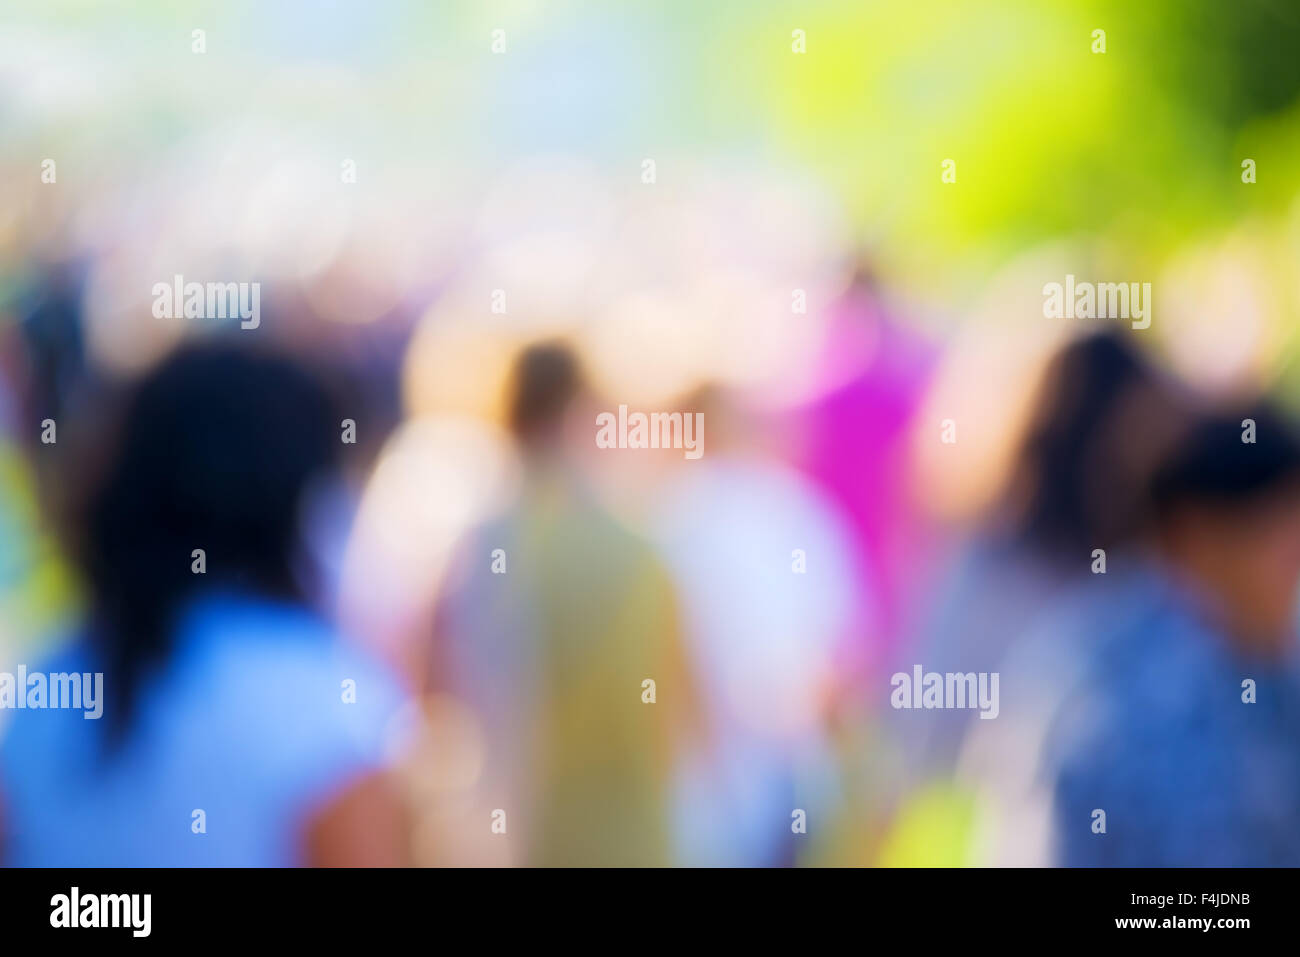 Blur crowd of people at outdoors concert, social event background, vivid colors, defocus image. Stock Photo